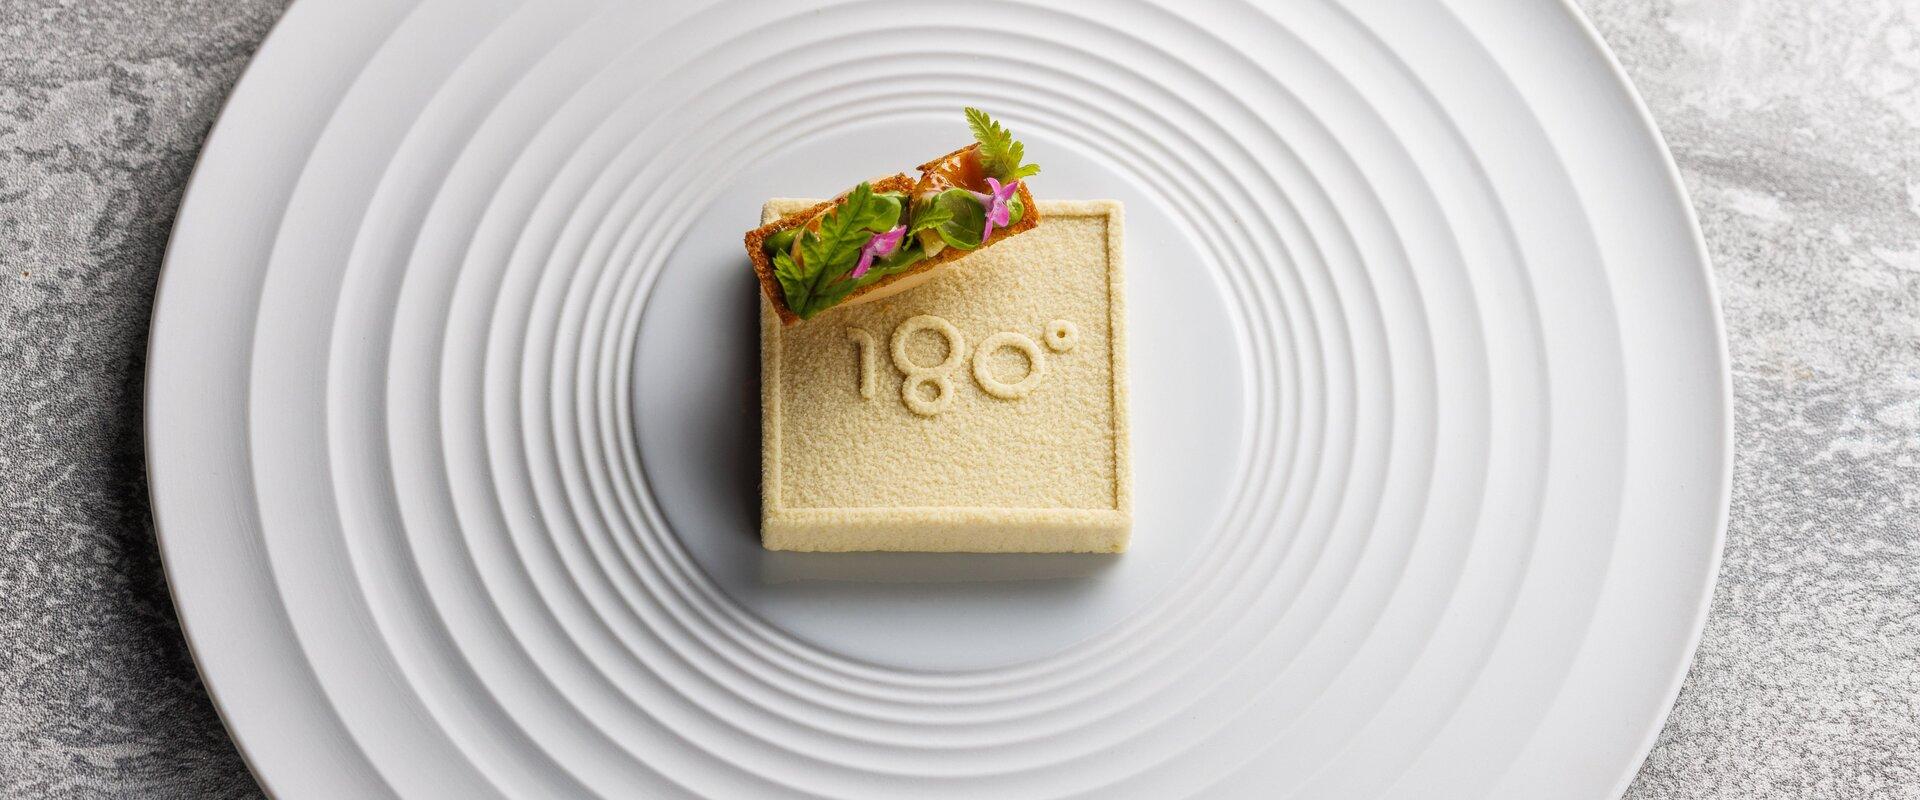 180° was created by the two Michelin star chef Matthias Diether and his dedicated crew. ‘The food we make must speak for itself. This means that the r